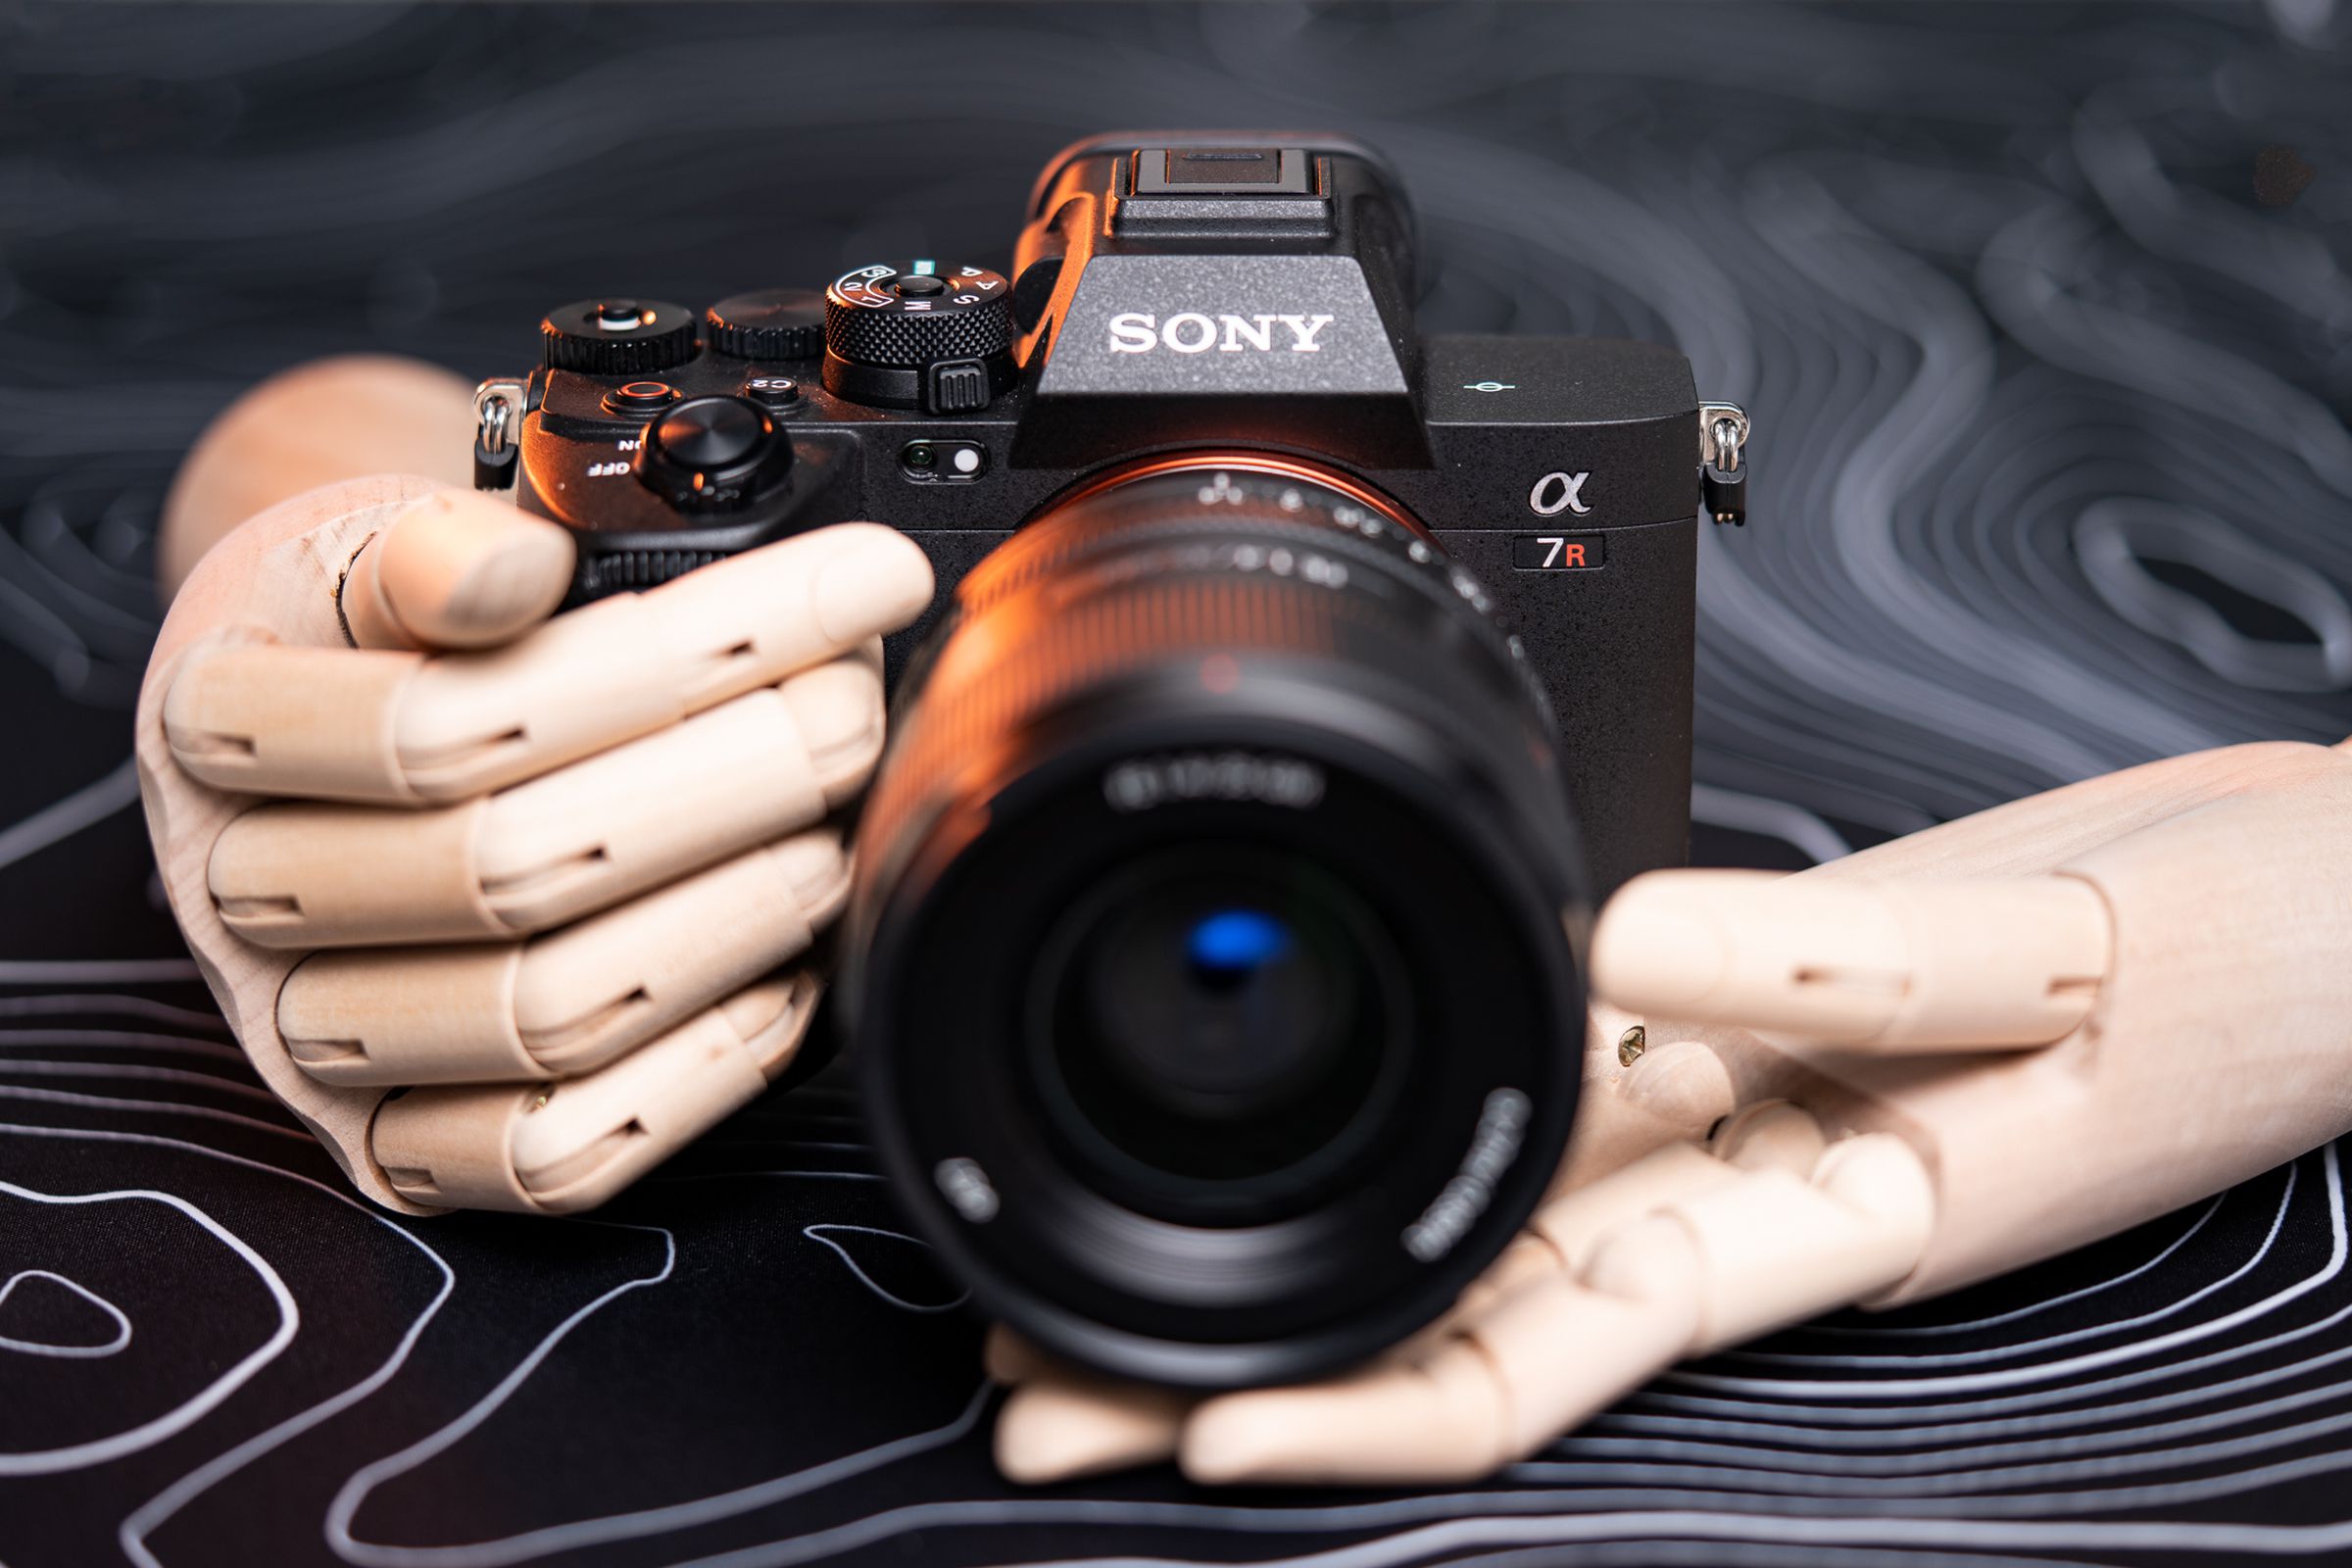 A front view of the Sony A7R V camera with lens attached, sitting on a patterned table with wooden model hands holding it.